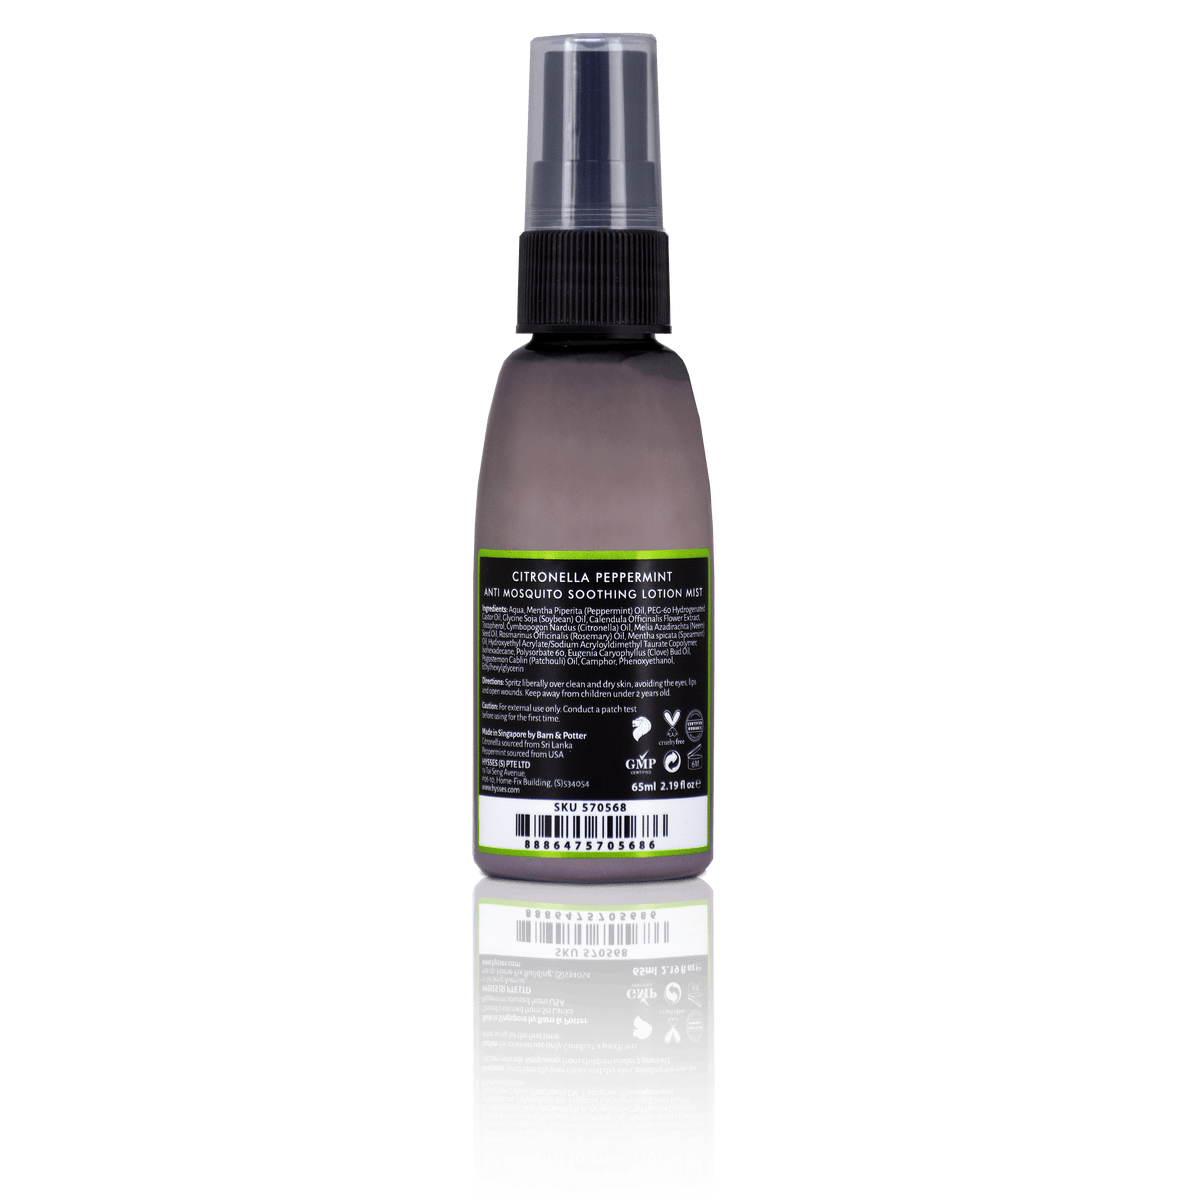 Anti Mosquito Soothing Lotion Mist - Hysses Singapore